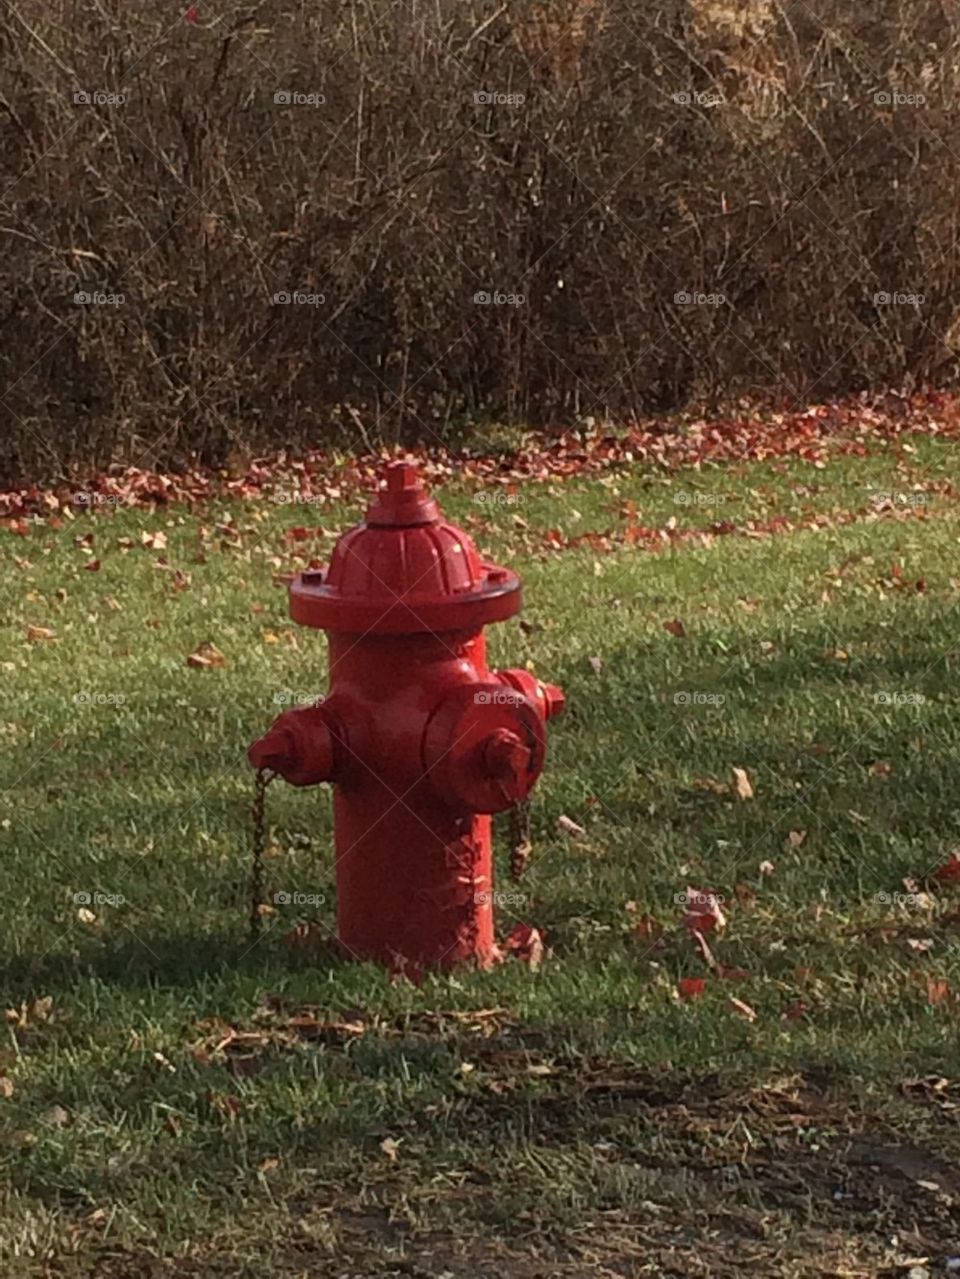 Red fire hydrant 